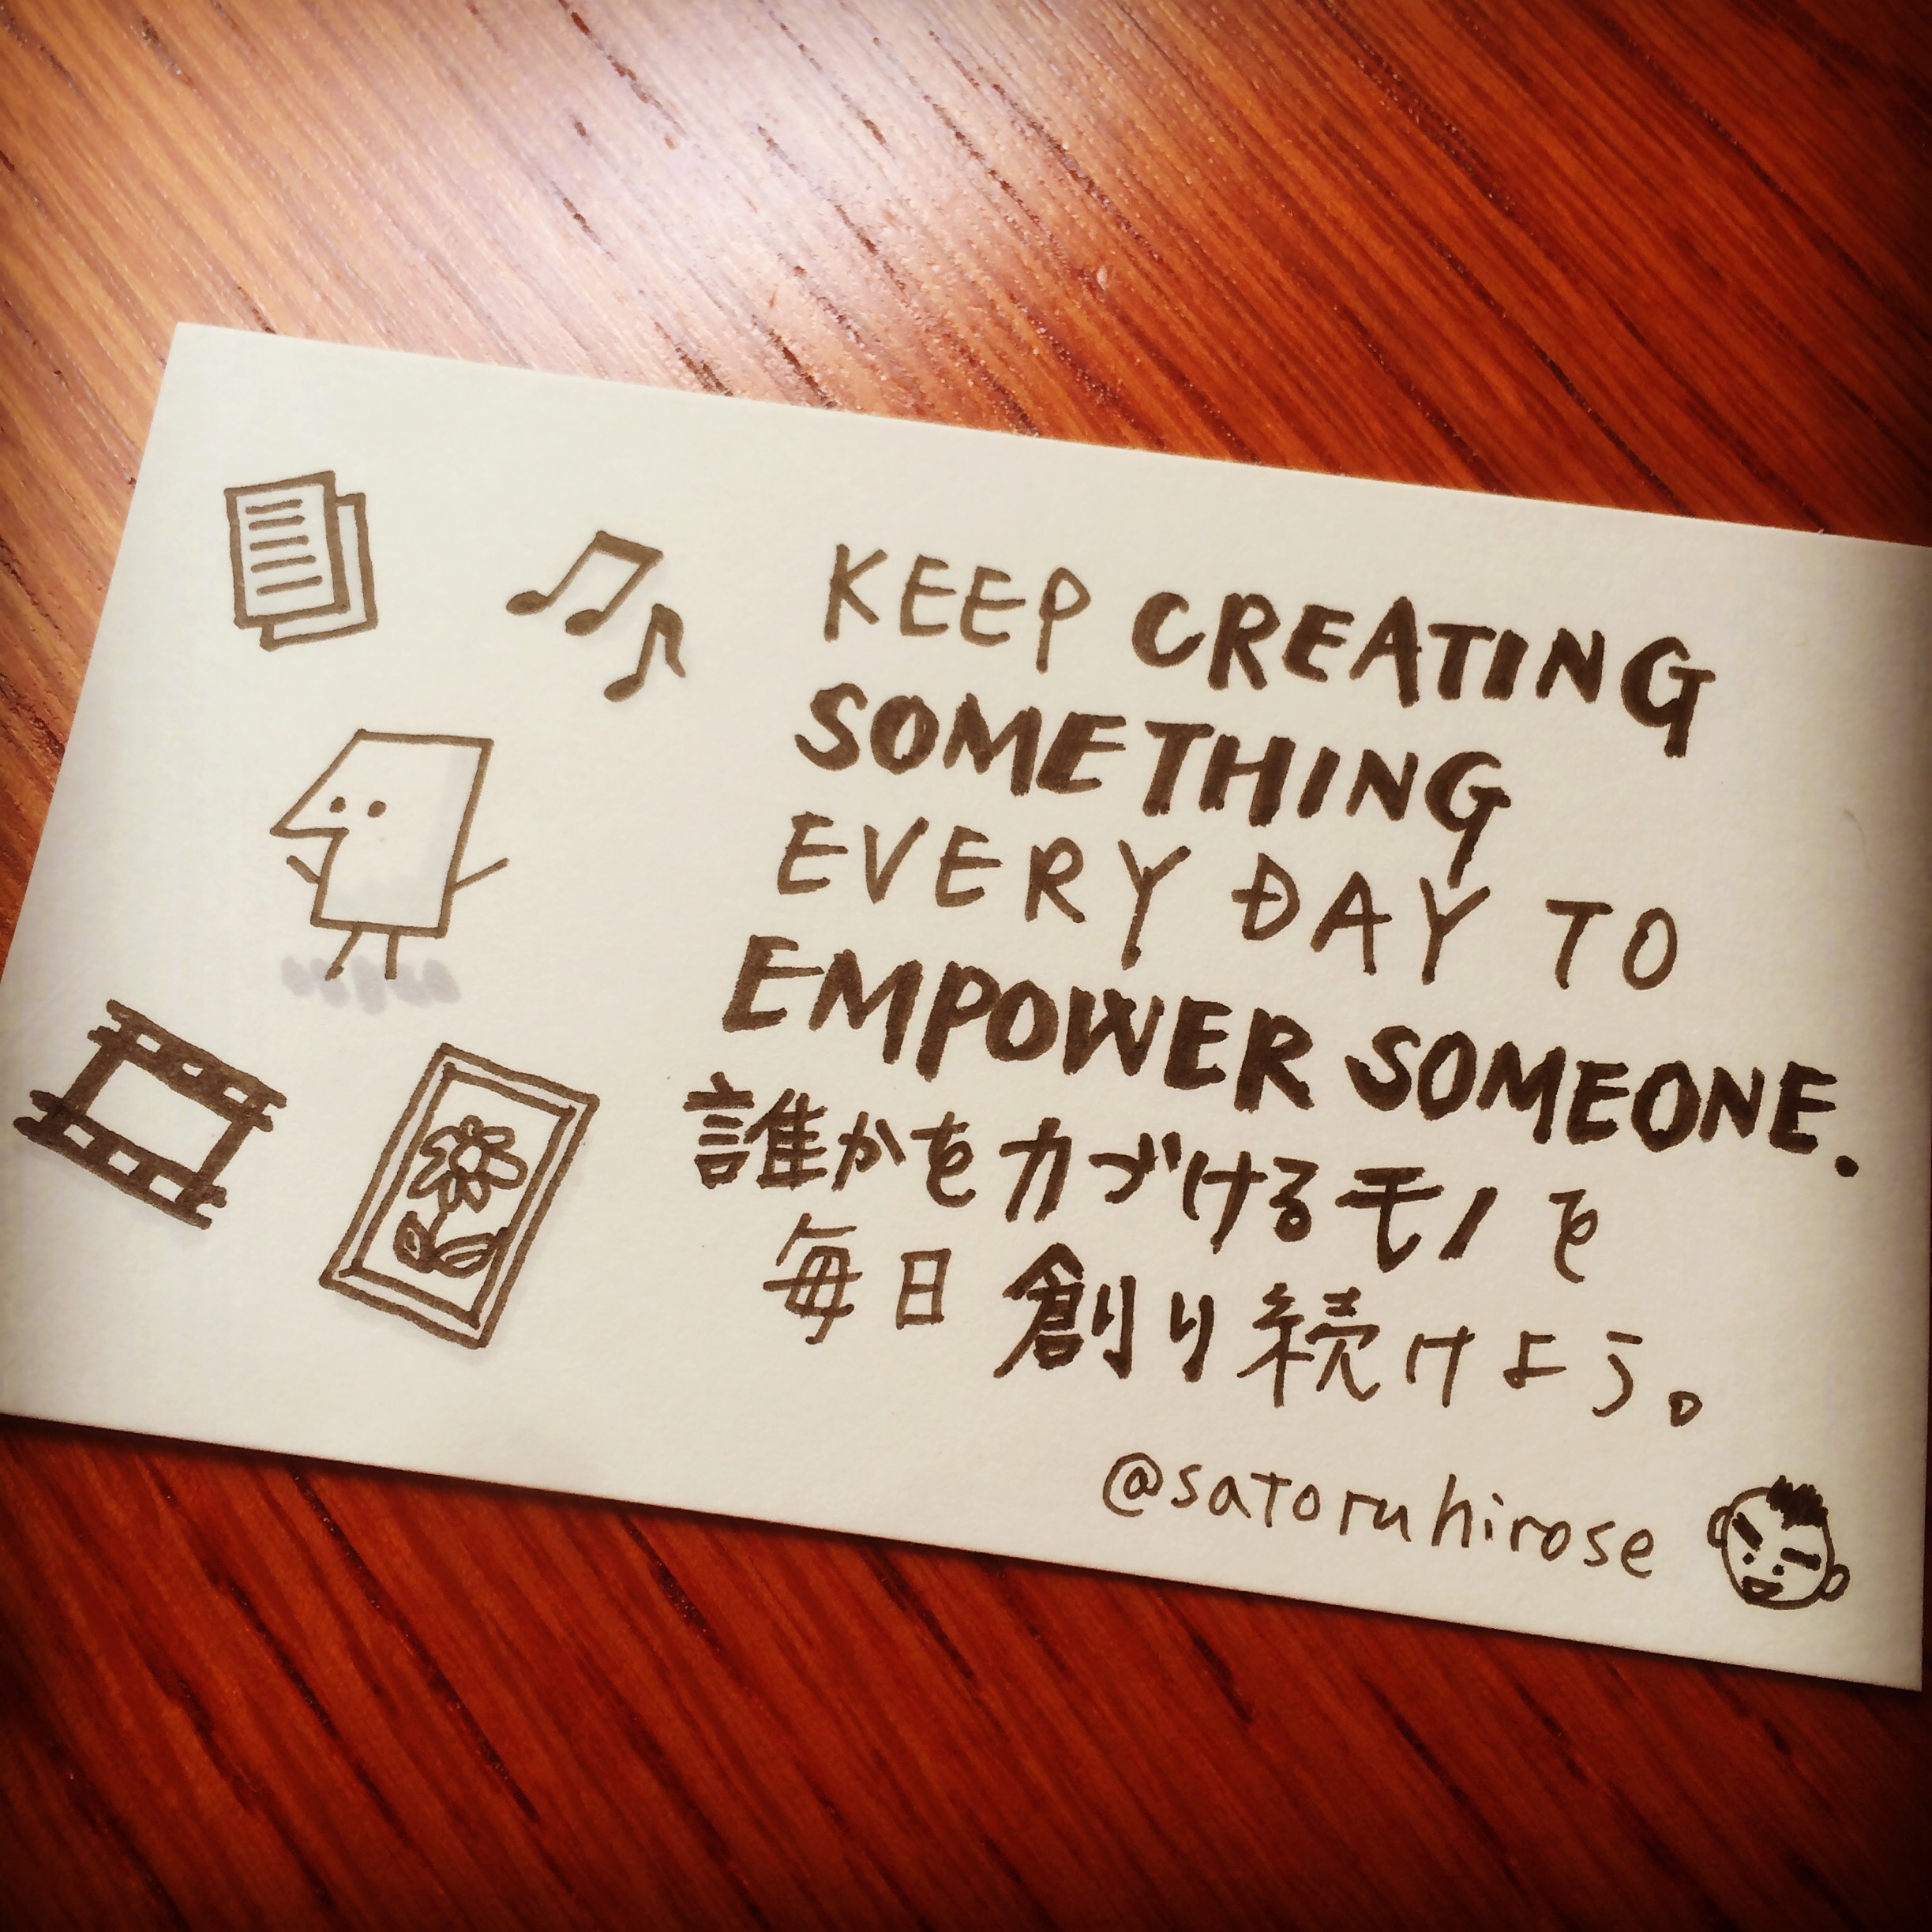 Keep creating something every day to empower someone.